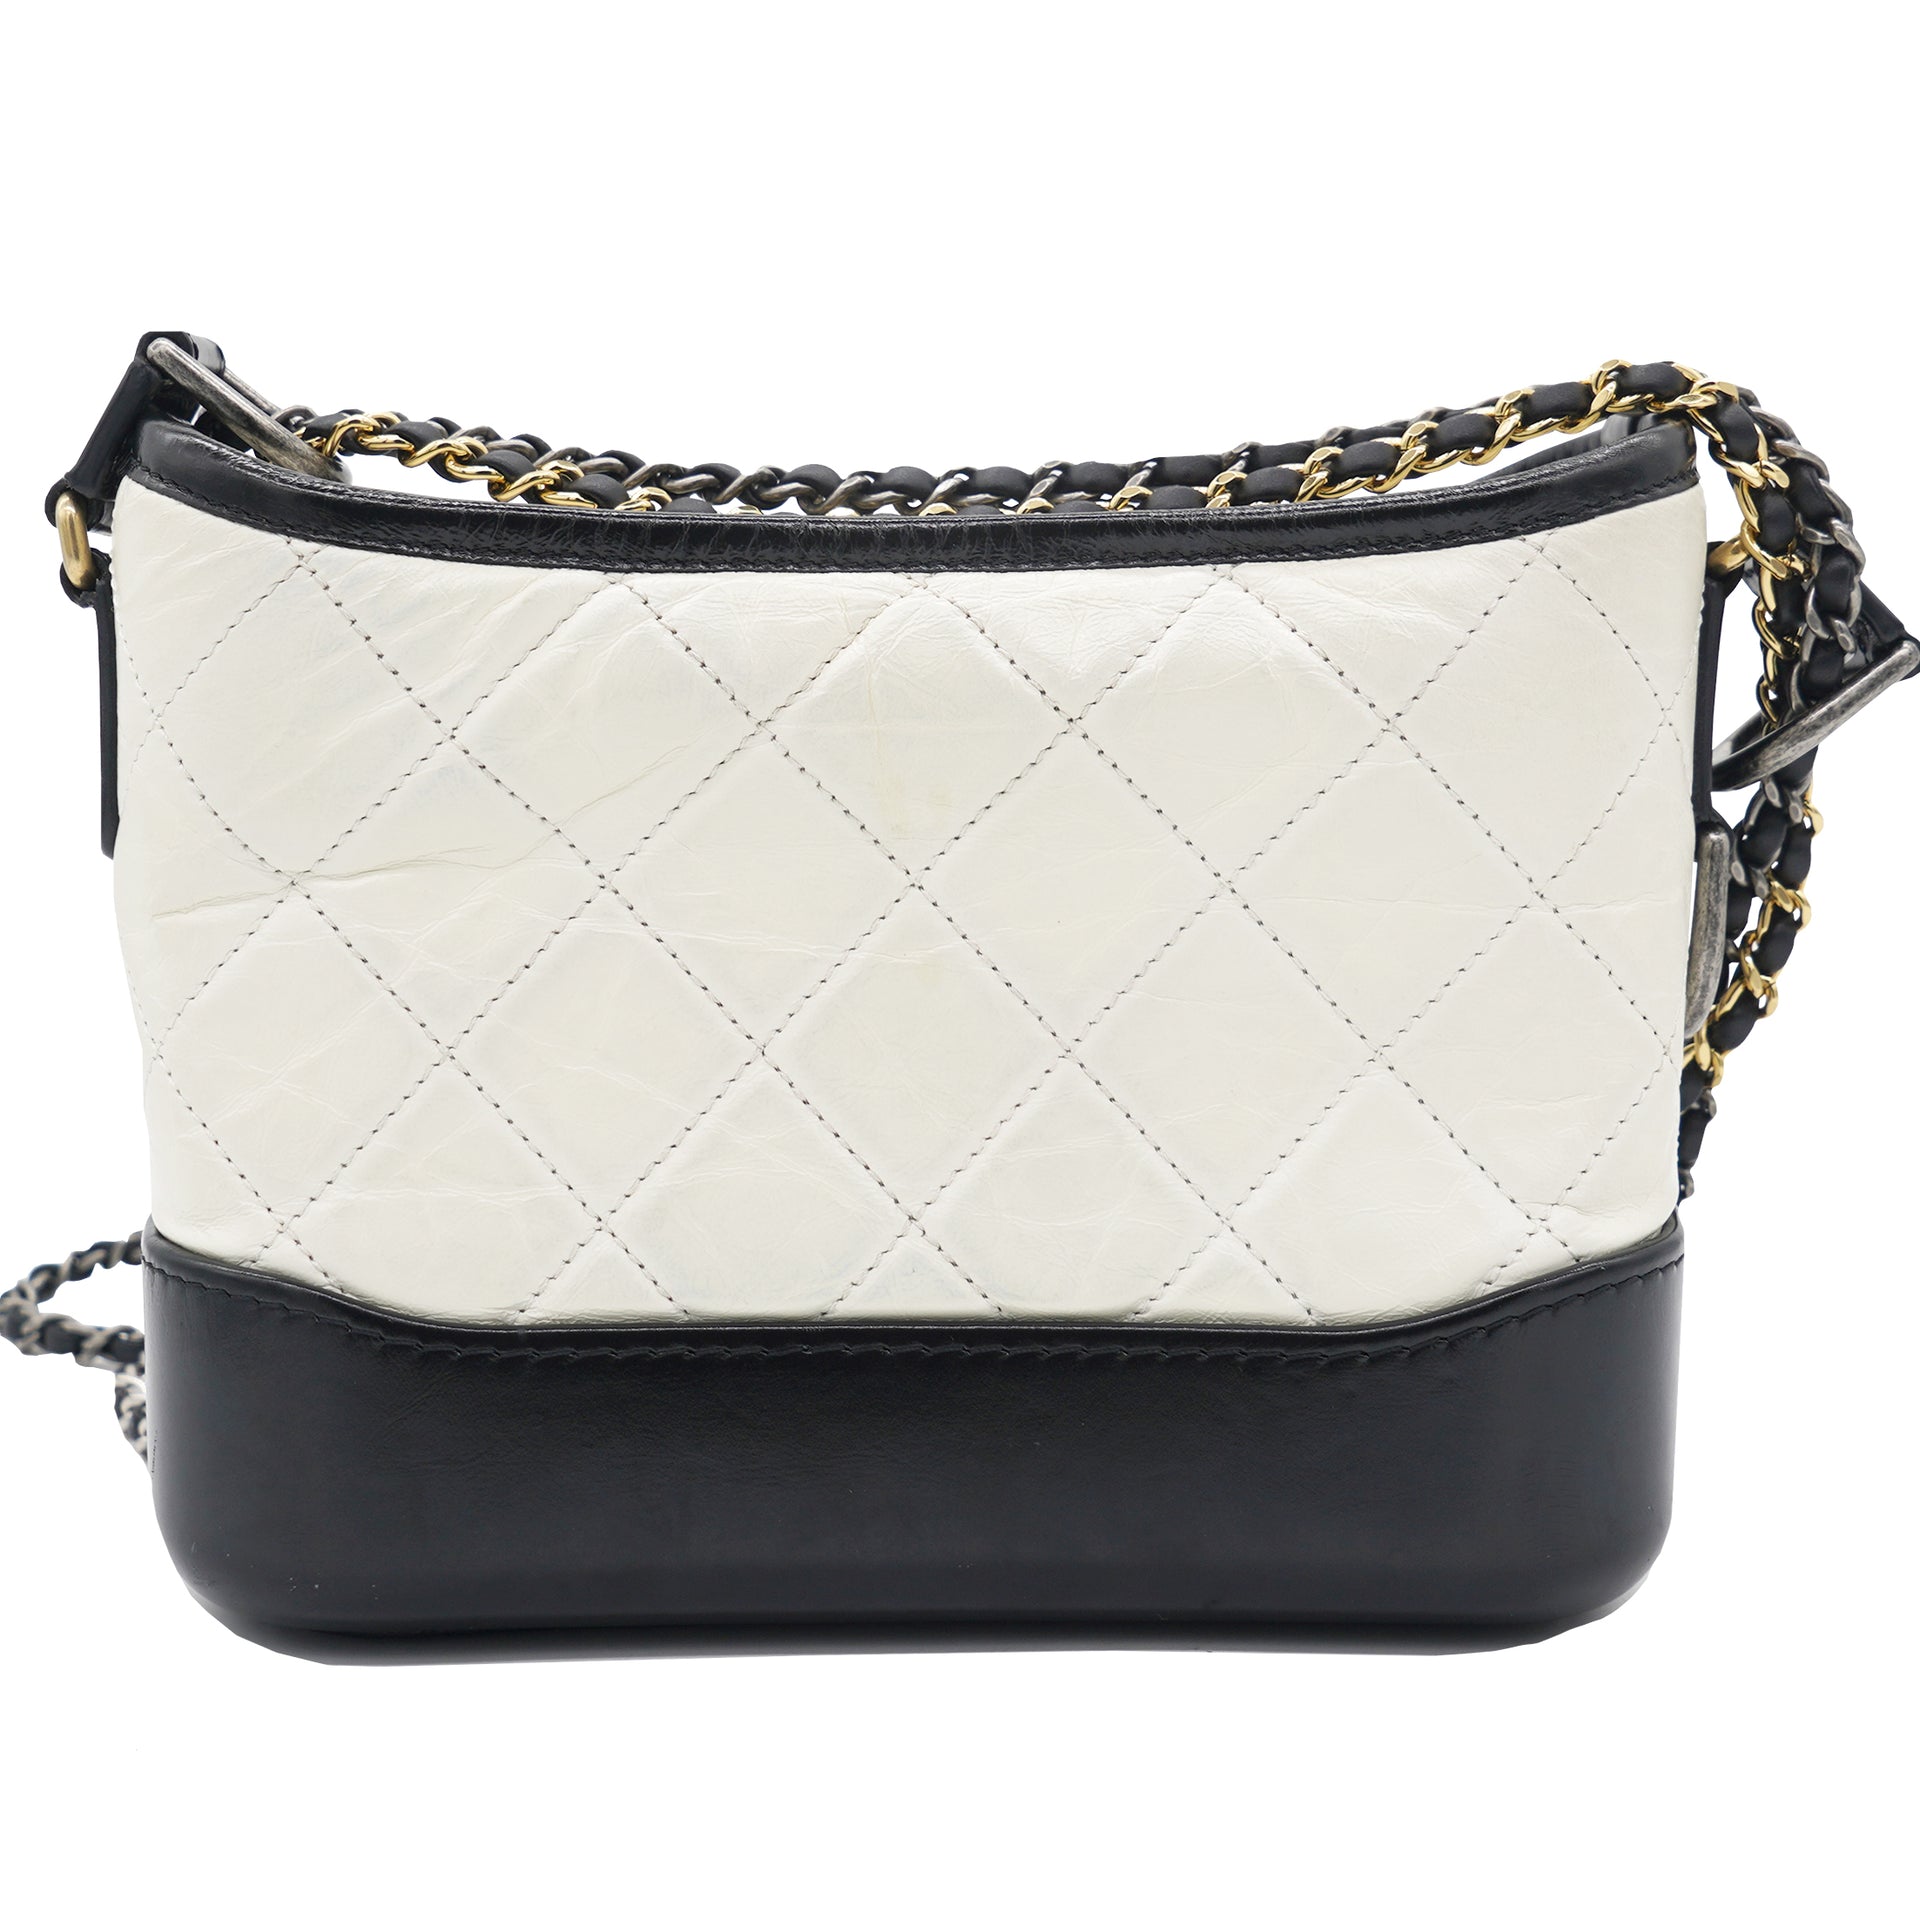 Sell Chanel Small Gabrielle Bag - White